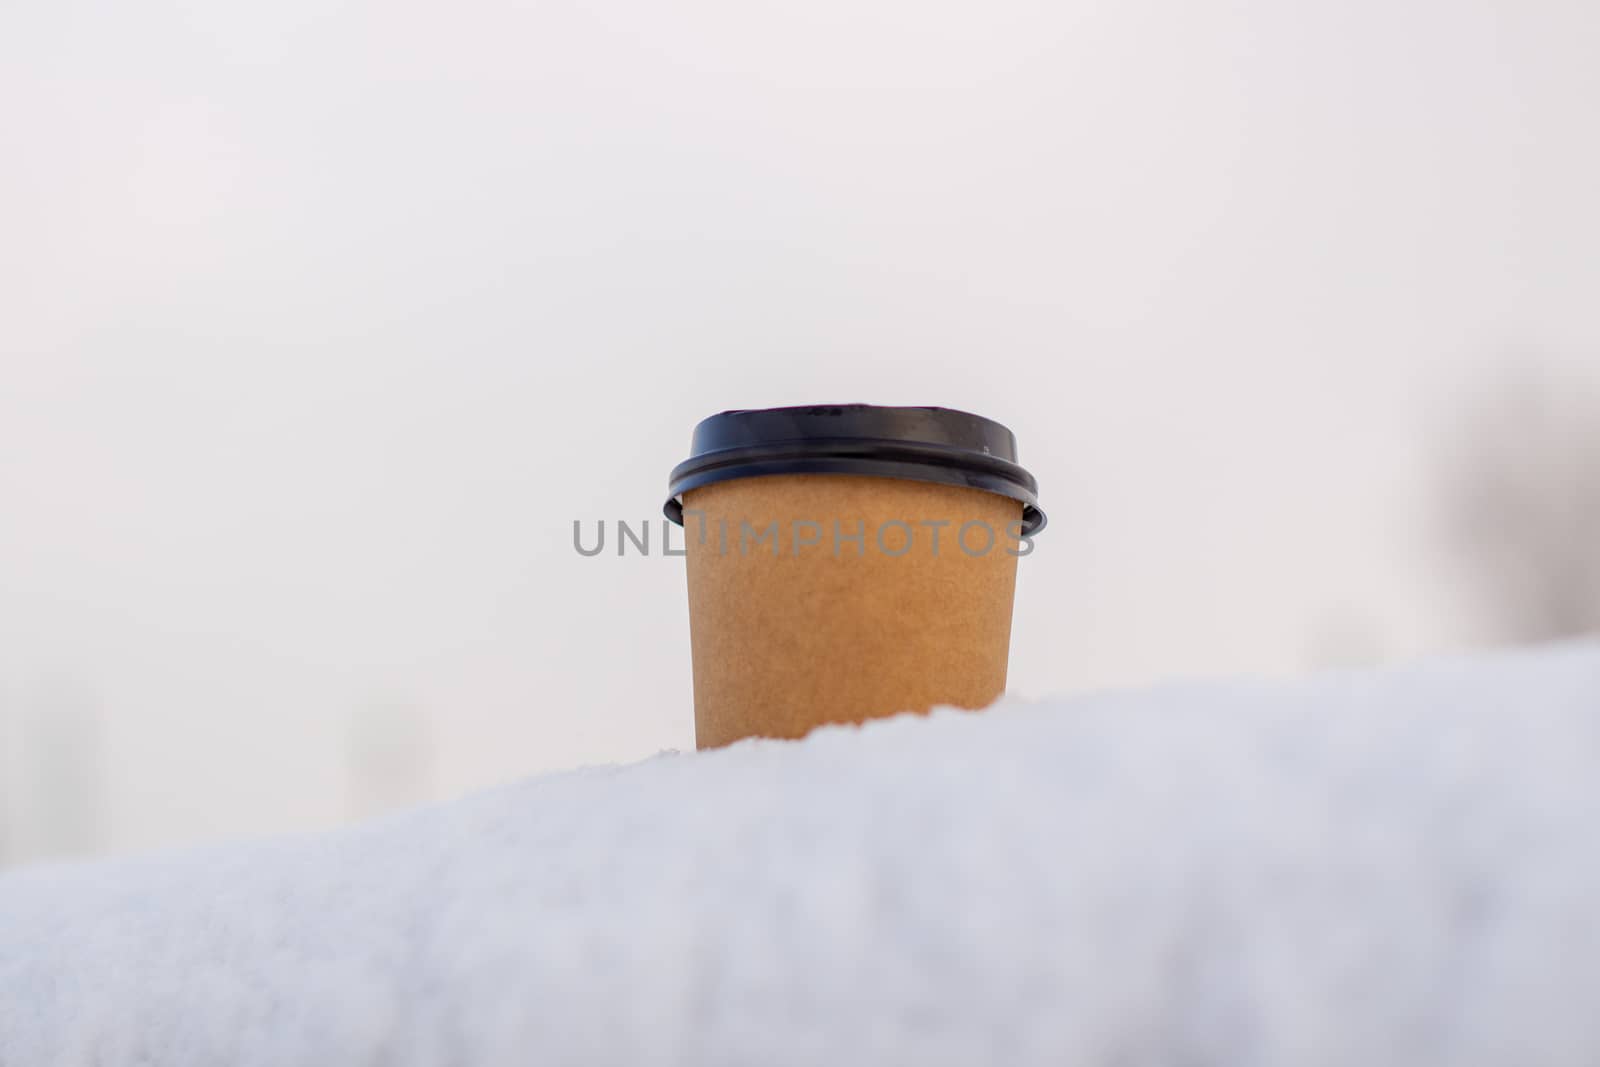 Cardboard coffee Cup in the snow in winter. Hot drink tea or coffee in a glass in winter outside.